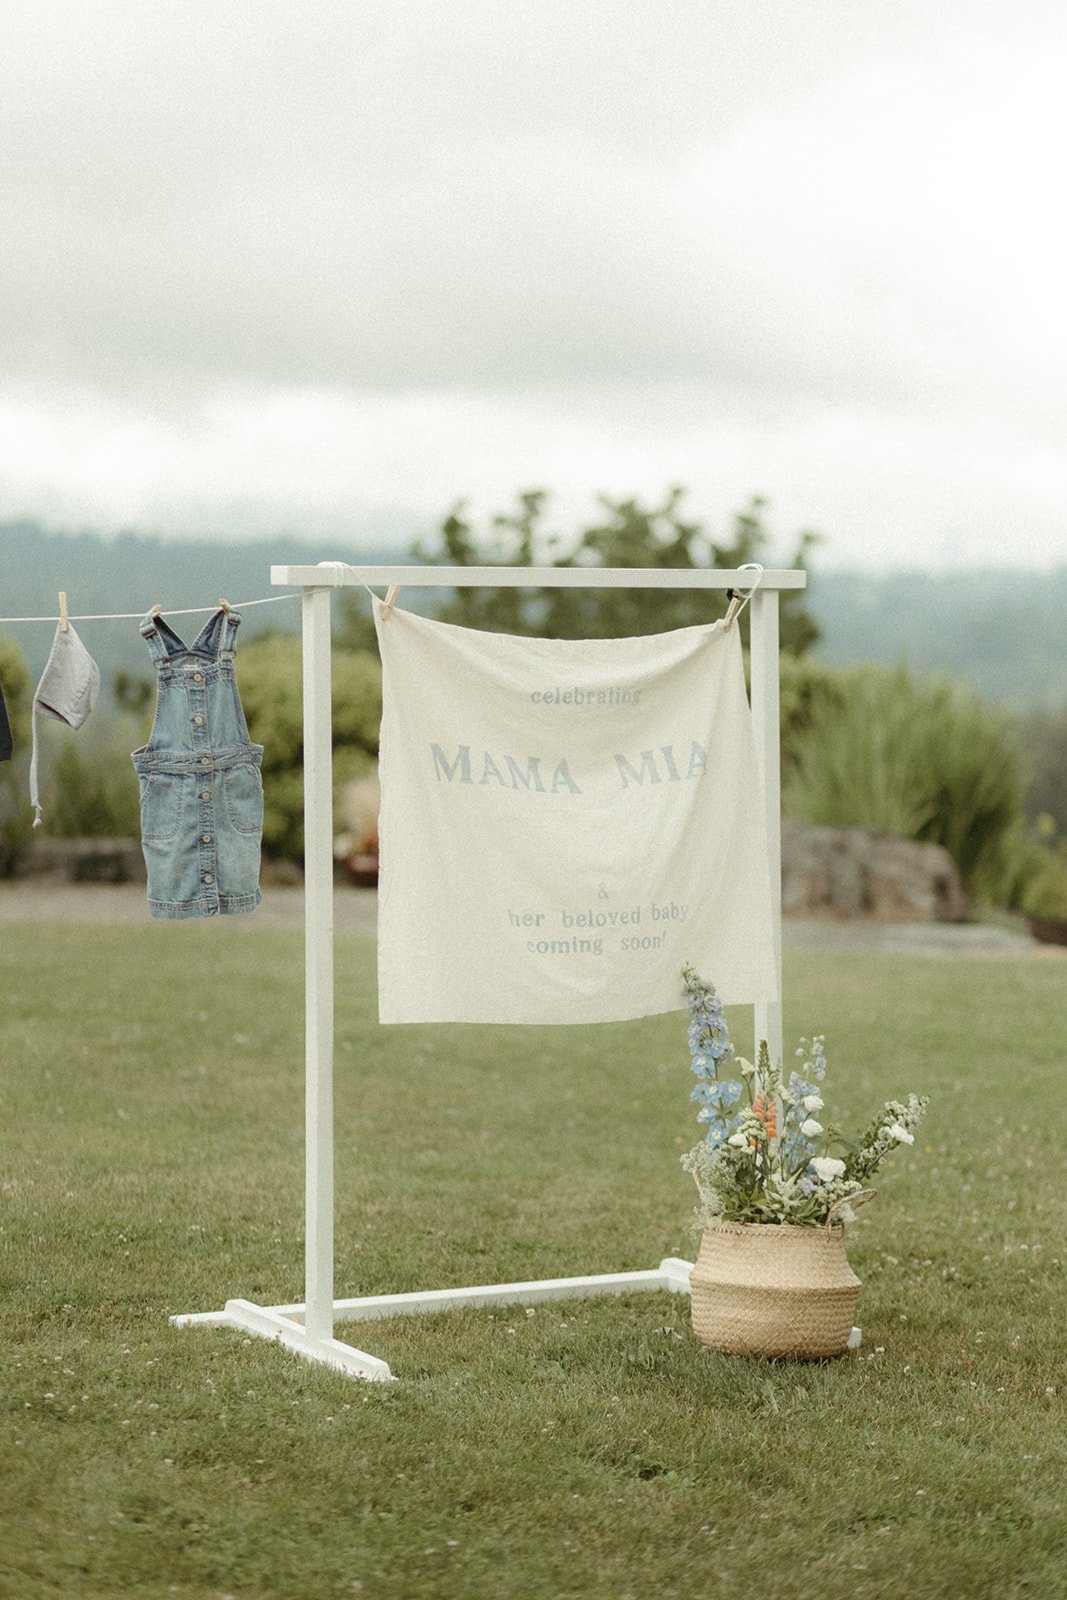 mama-mia-baby-shower-events-by-elle-bre-poole-photography-4.jpg